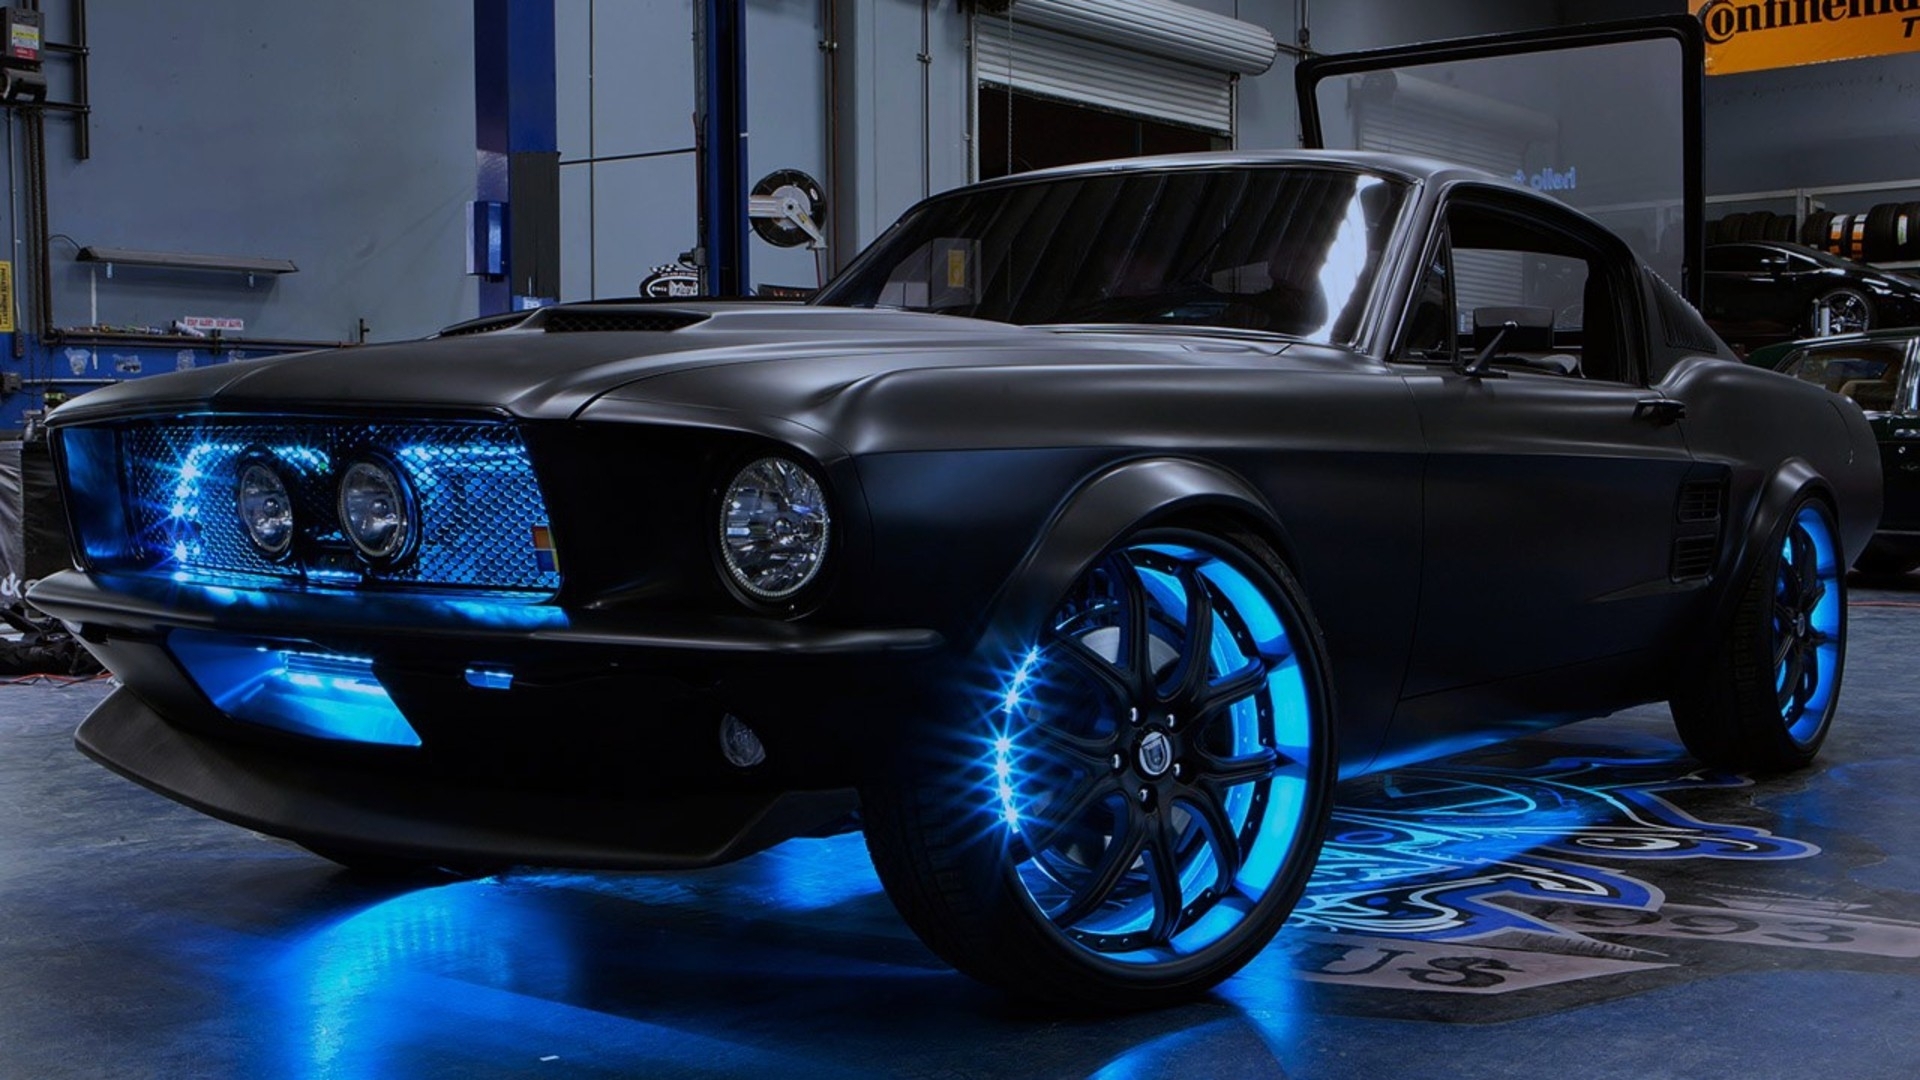 Black Cars Ford Mustang West Coast Customs Wallpaper